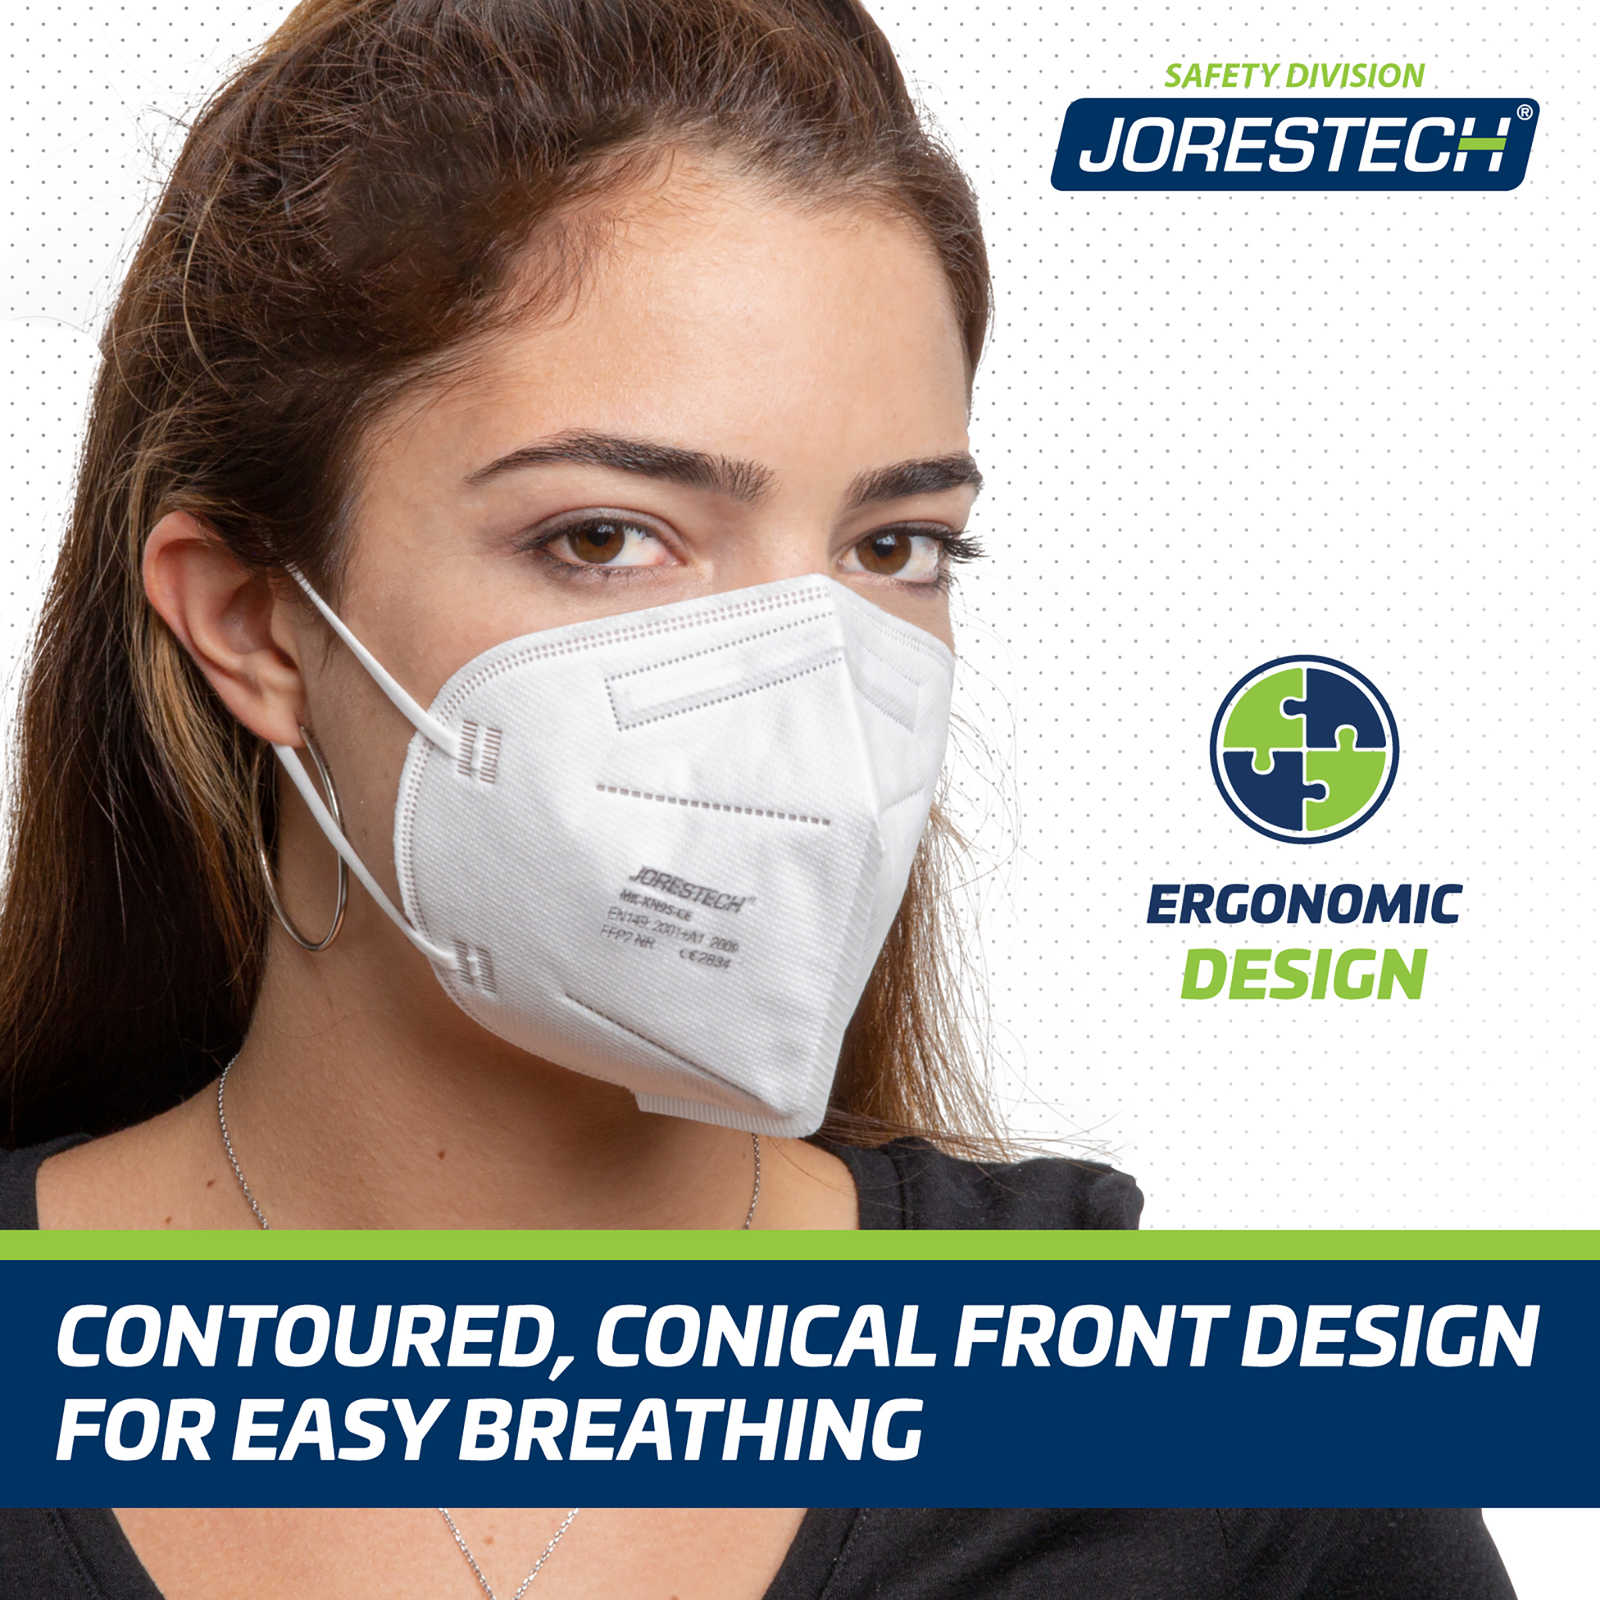  Woman wearing a safety mask and an icon with text that reads: ergonomic design.